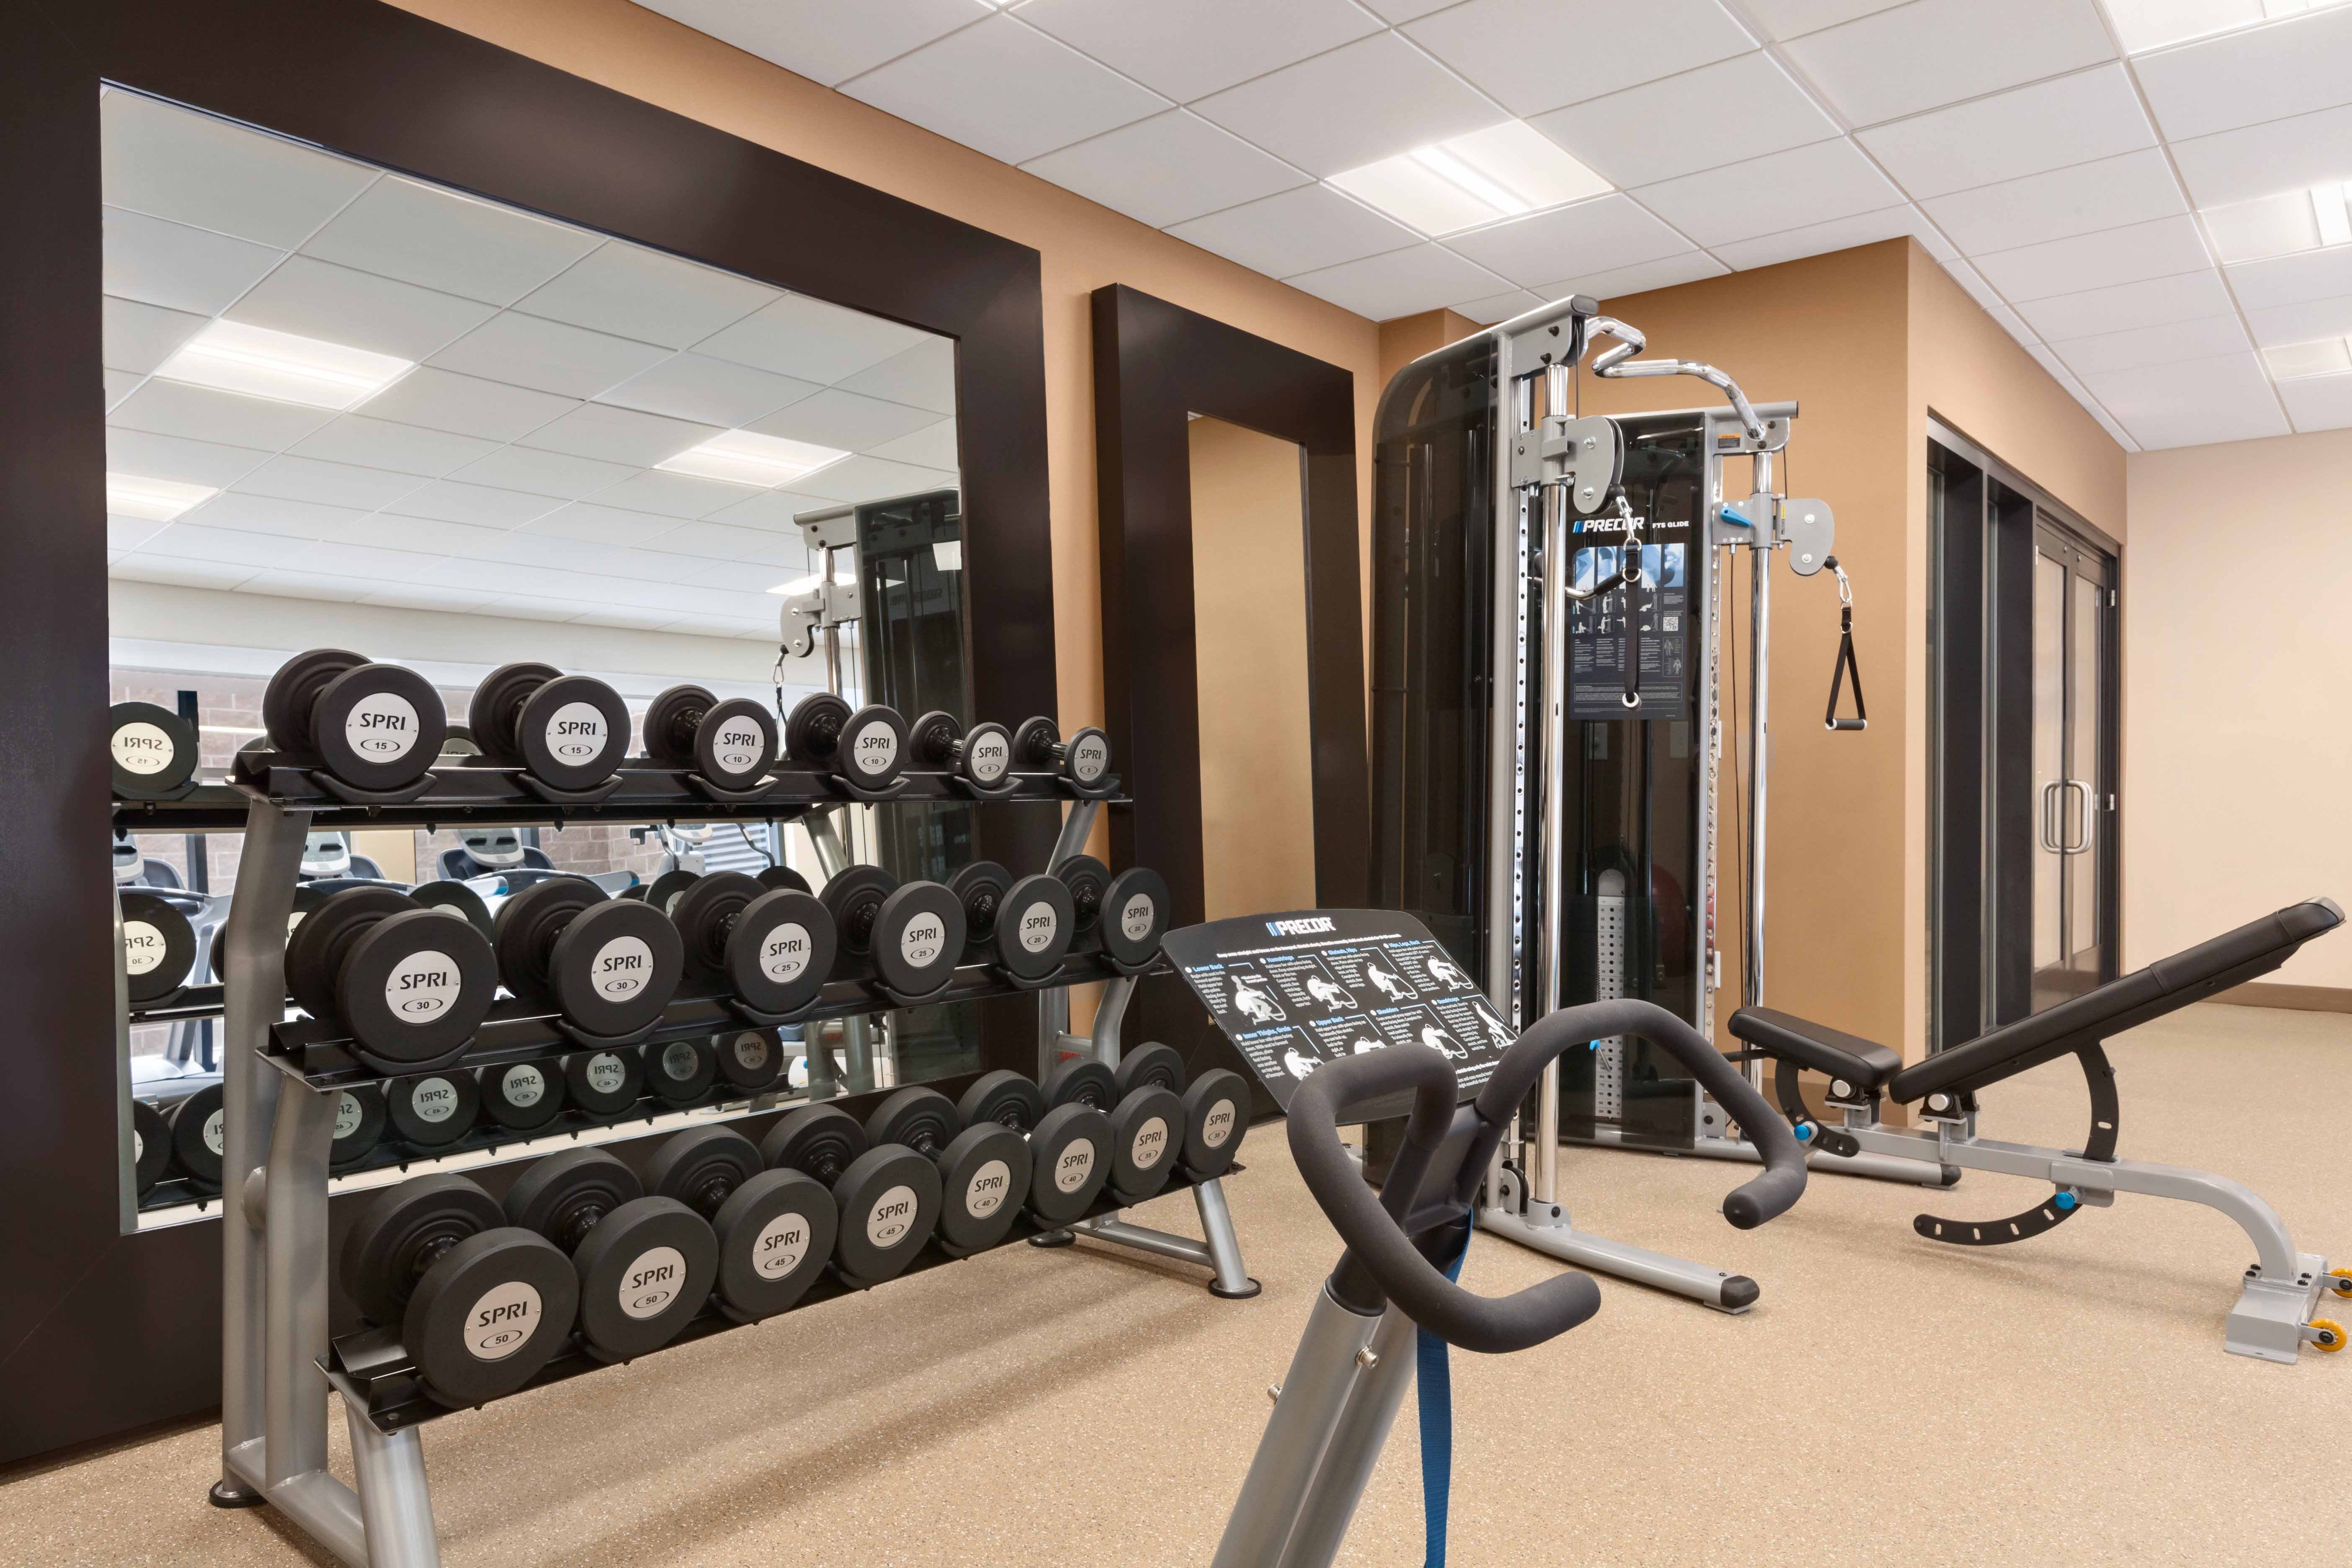 Fitness Center With Free Weights by Large Mirror, and Cardio Equipment